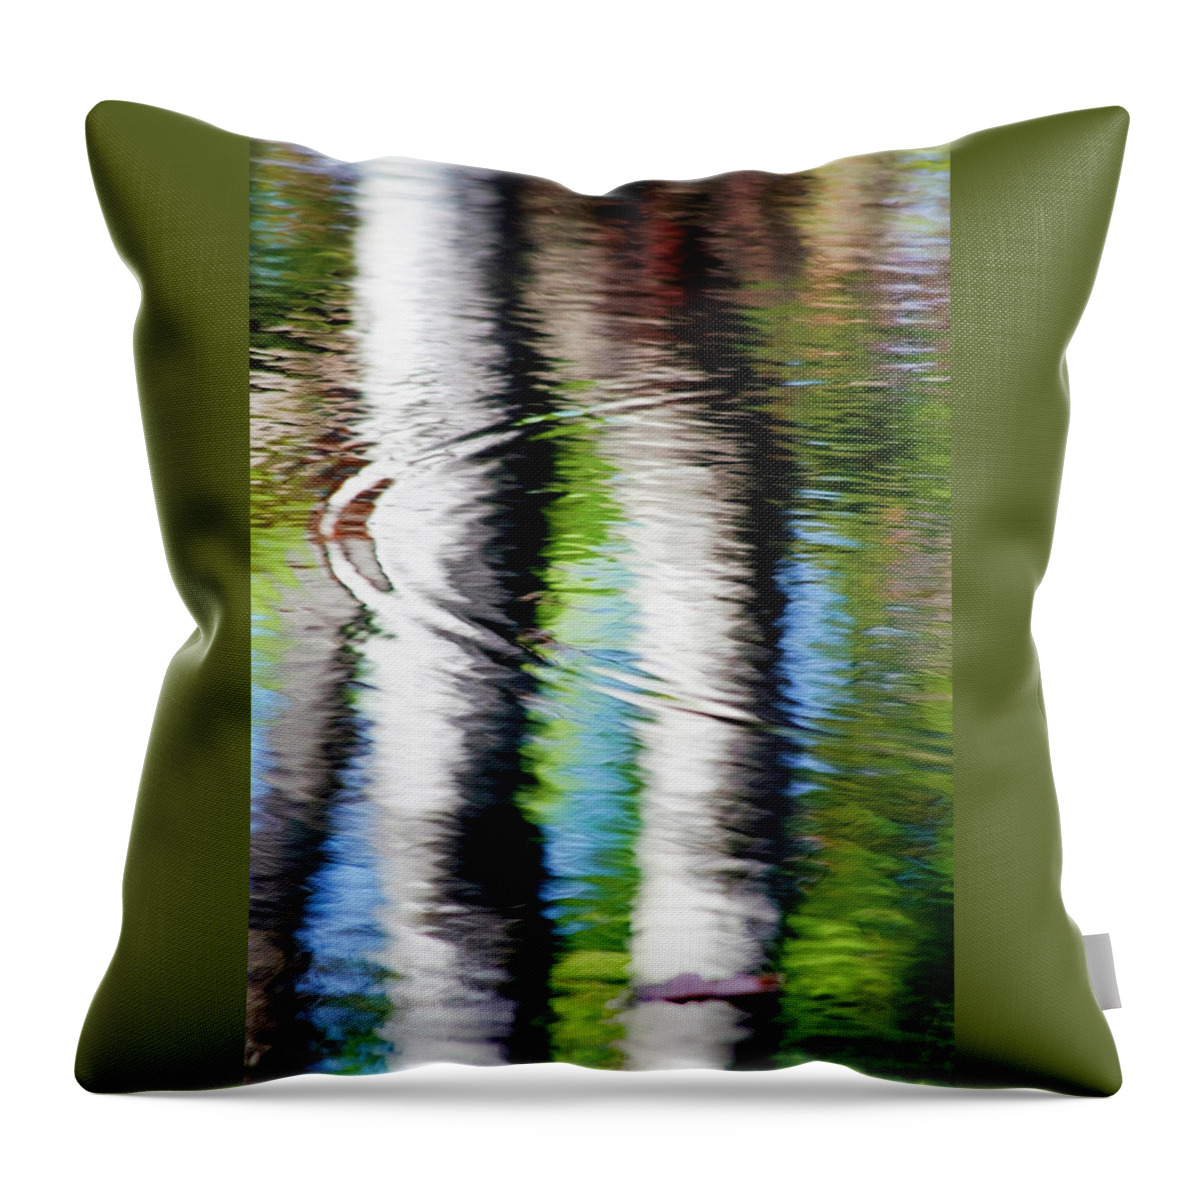 Water Throw Pillow featuring the photograph First Drop Water Reflection by Christina Rollo